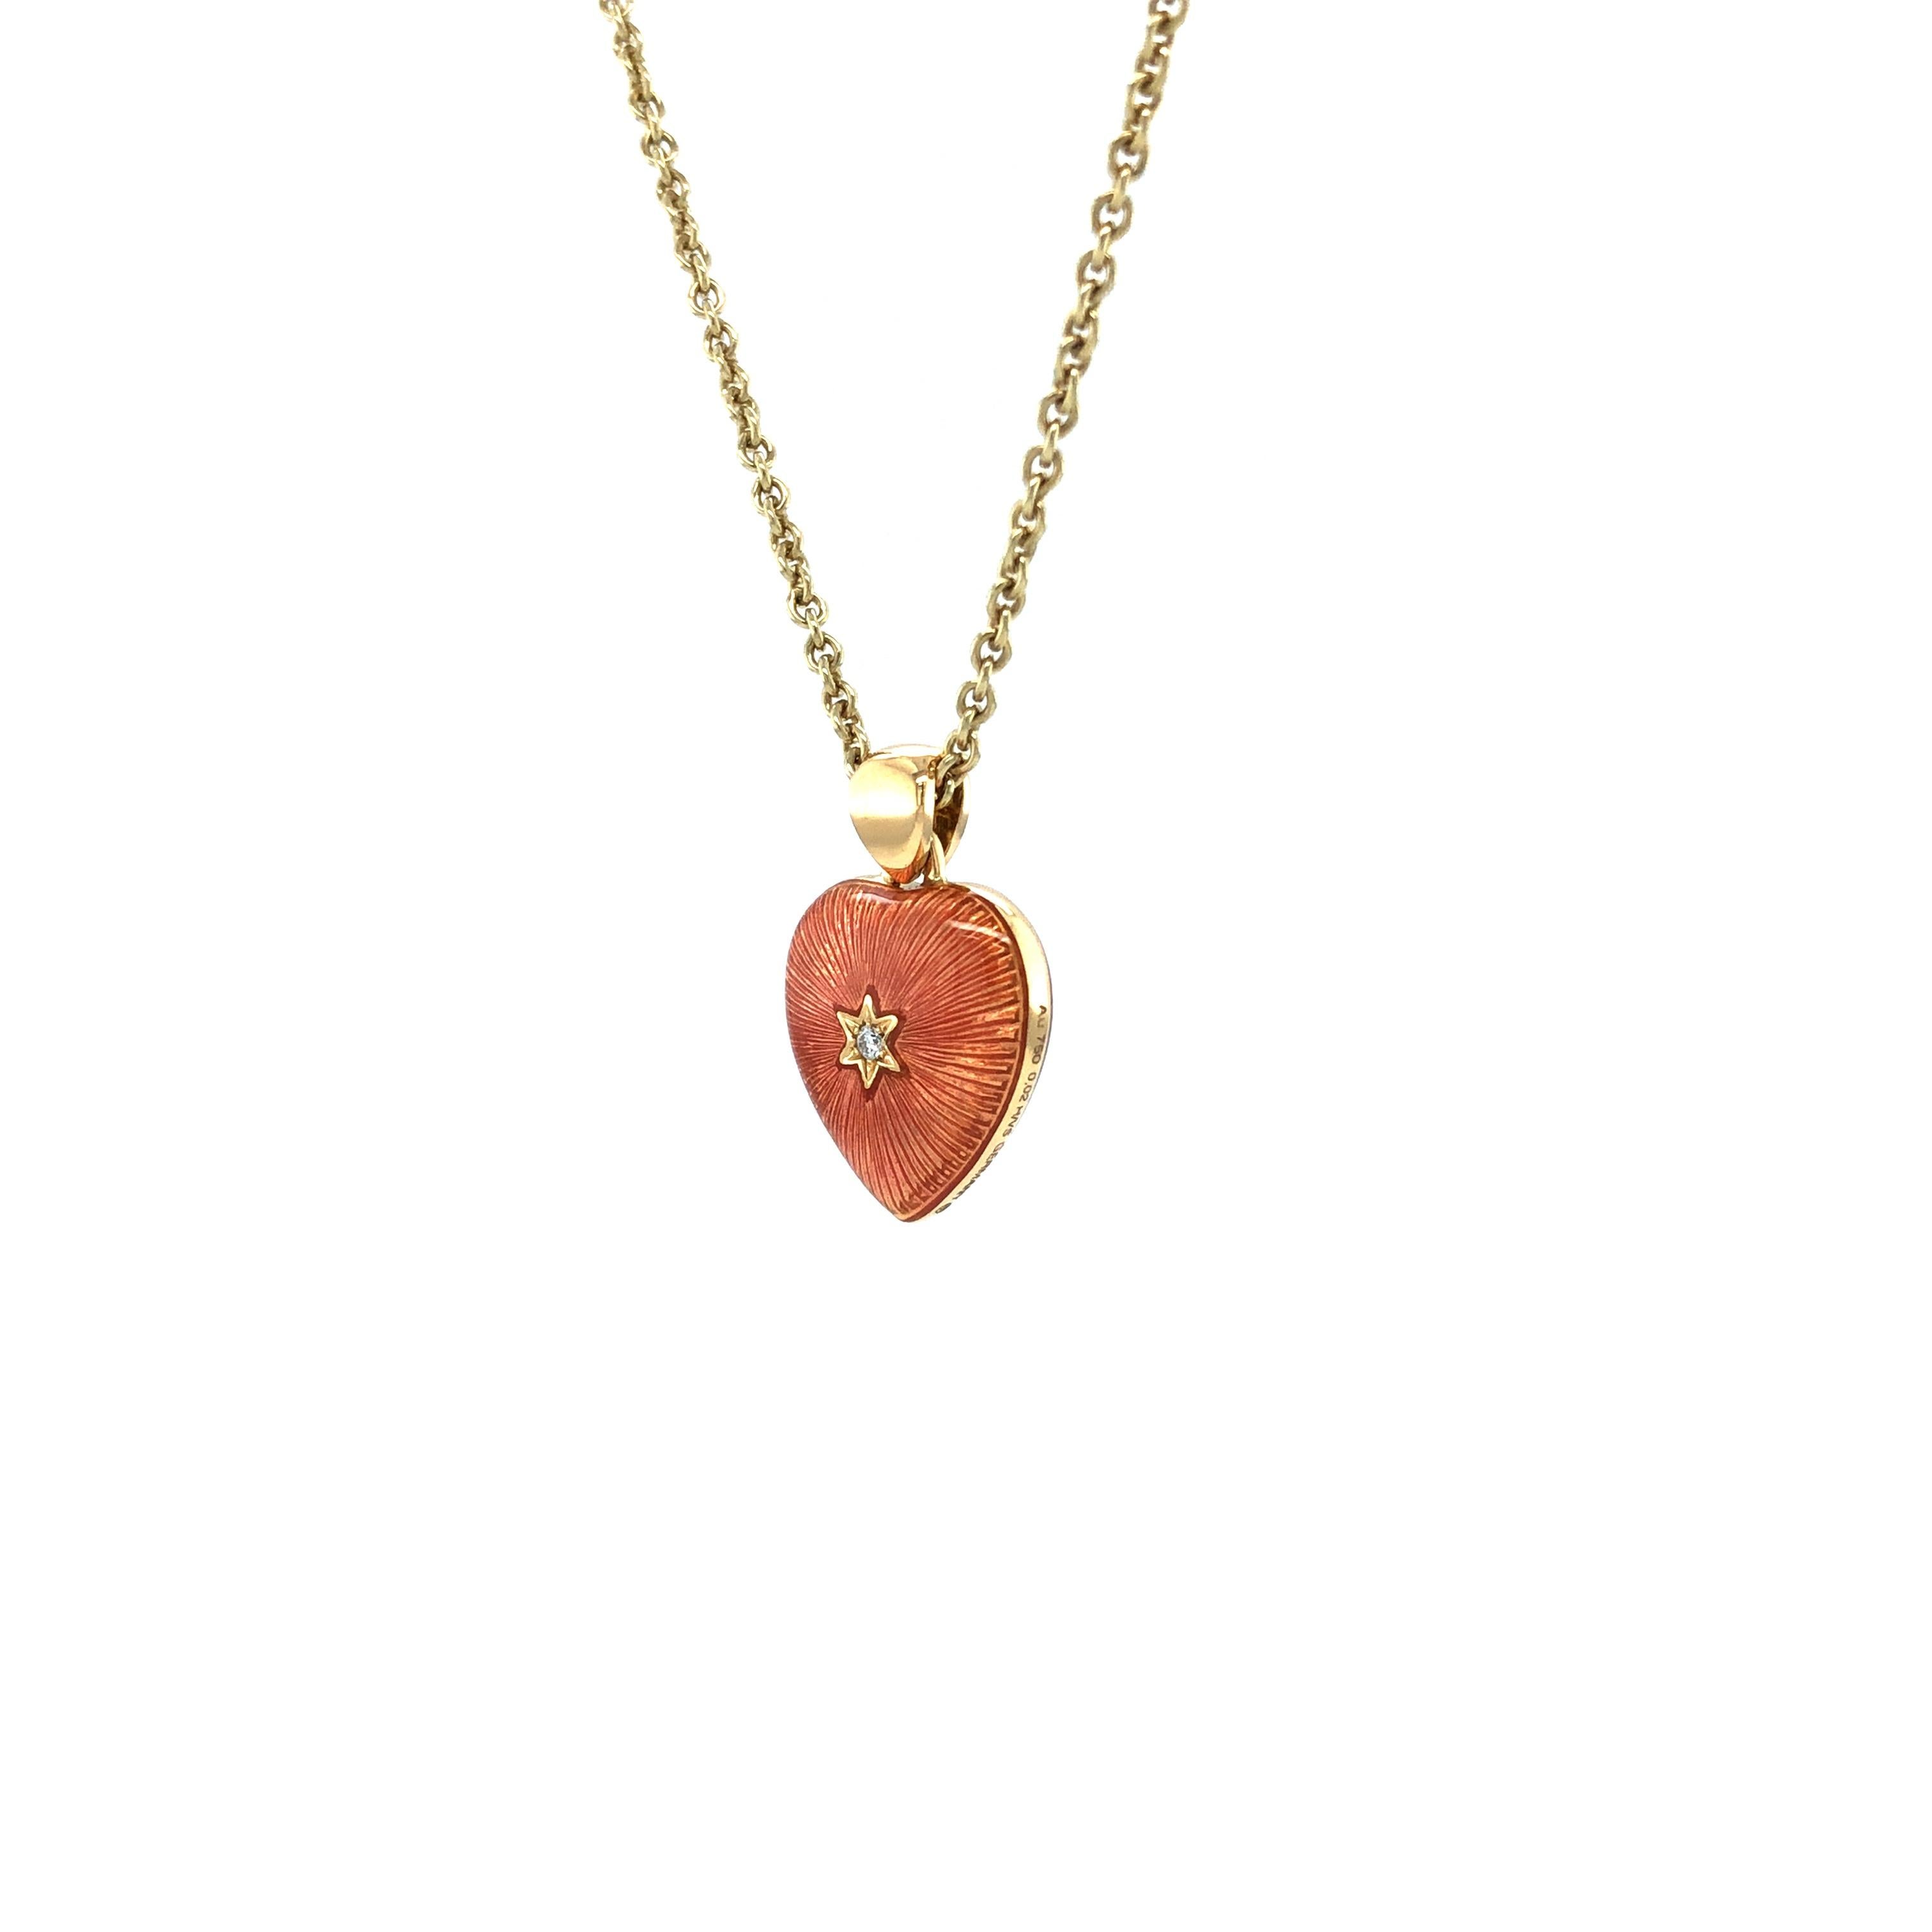 Women's Heart Pendant Necklace 18k Yellow Gold Red and Pink Enamel 2 Diamonds 2.02ct GVS For Sale